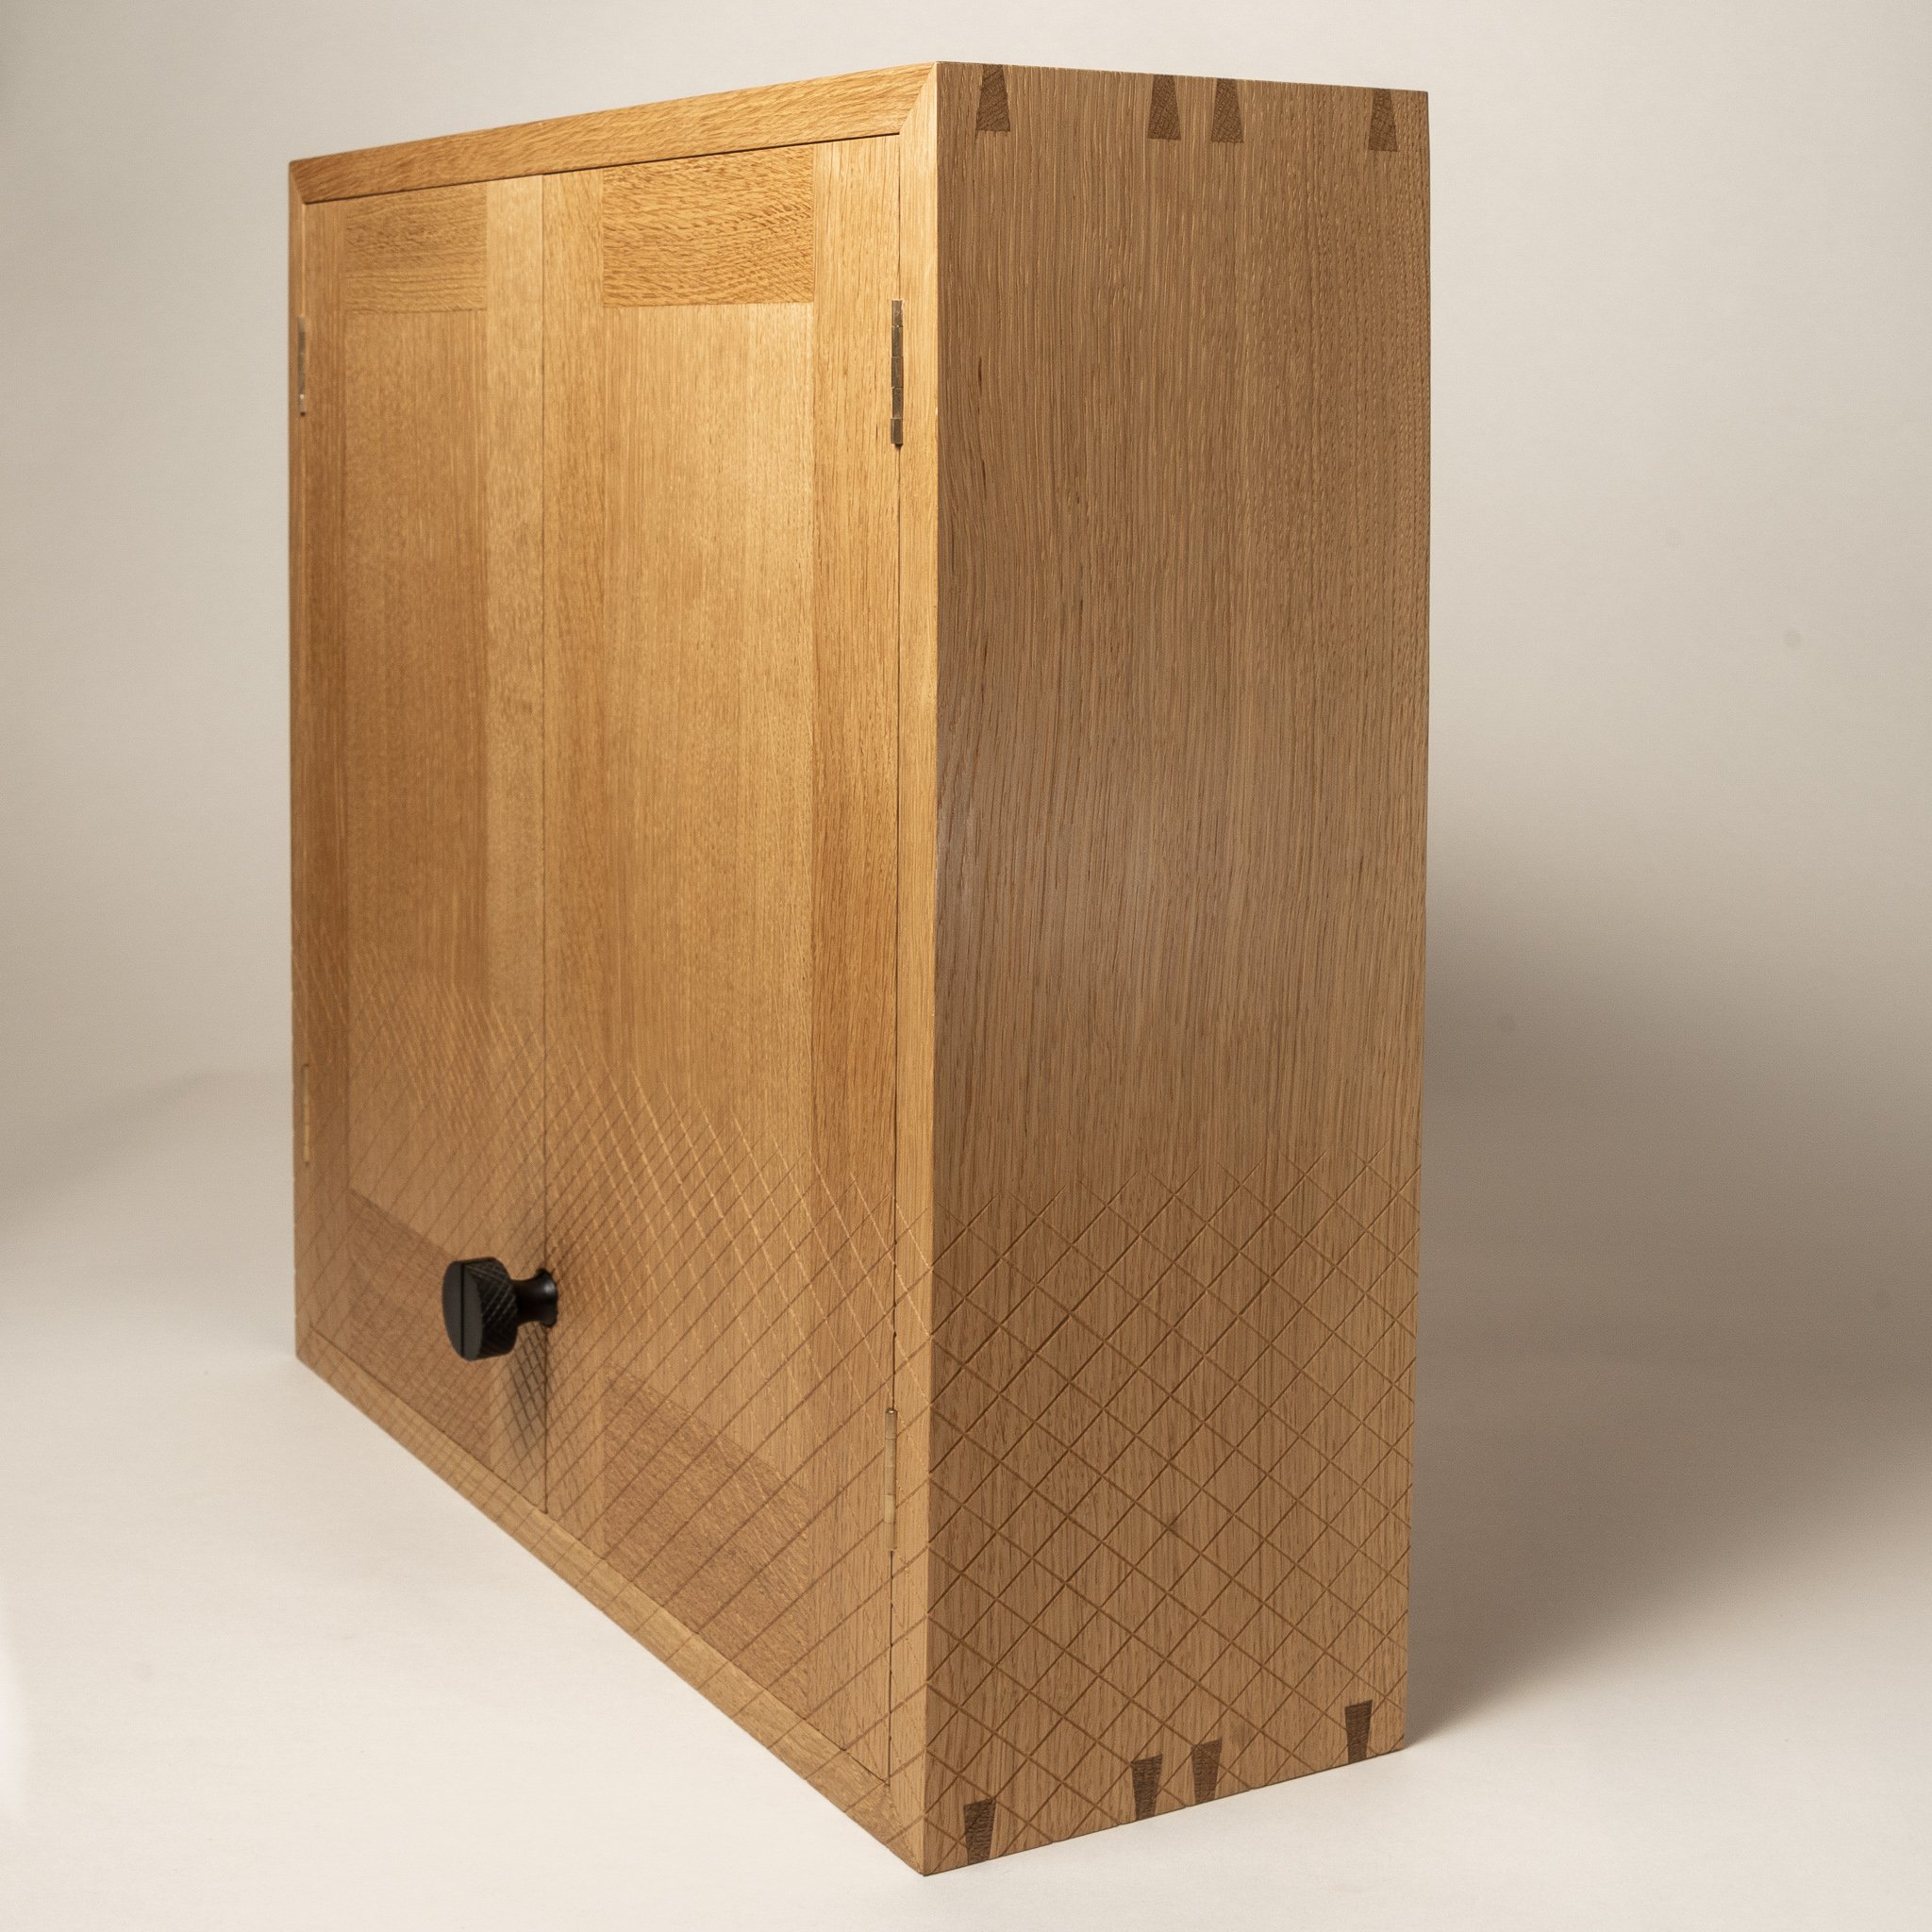 Whisky cabinet in oak with hancut dovetails and relief carving and a hand carved ebony handle